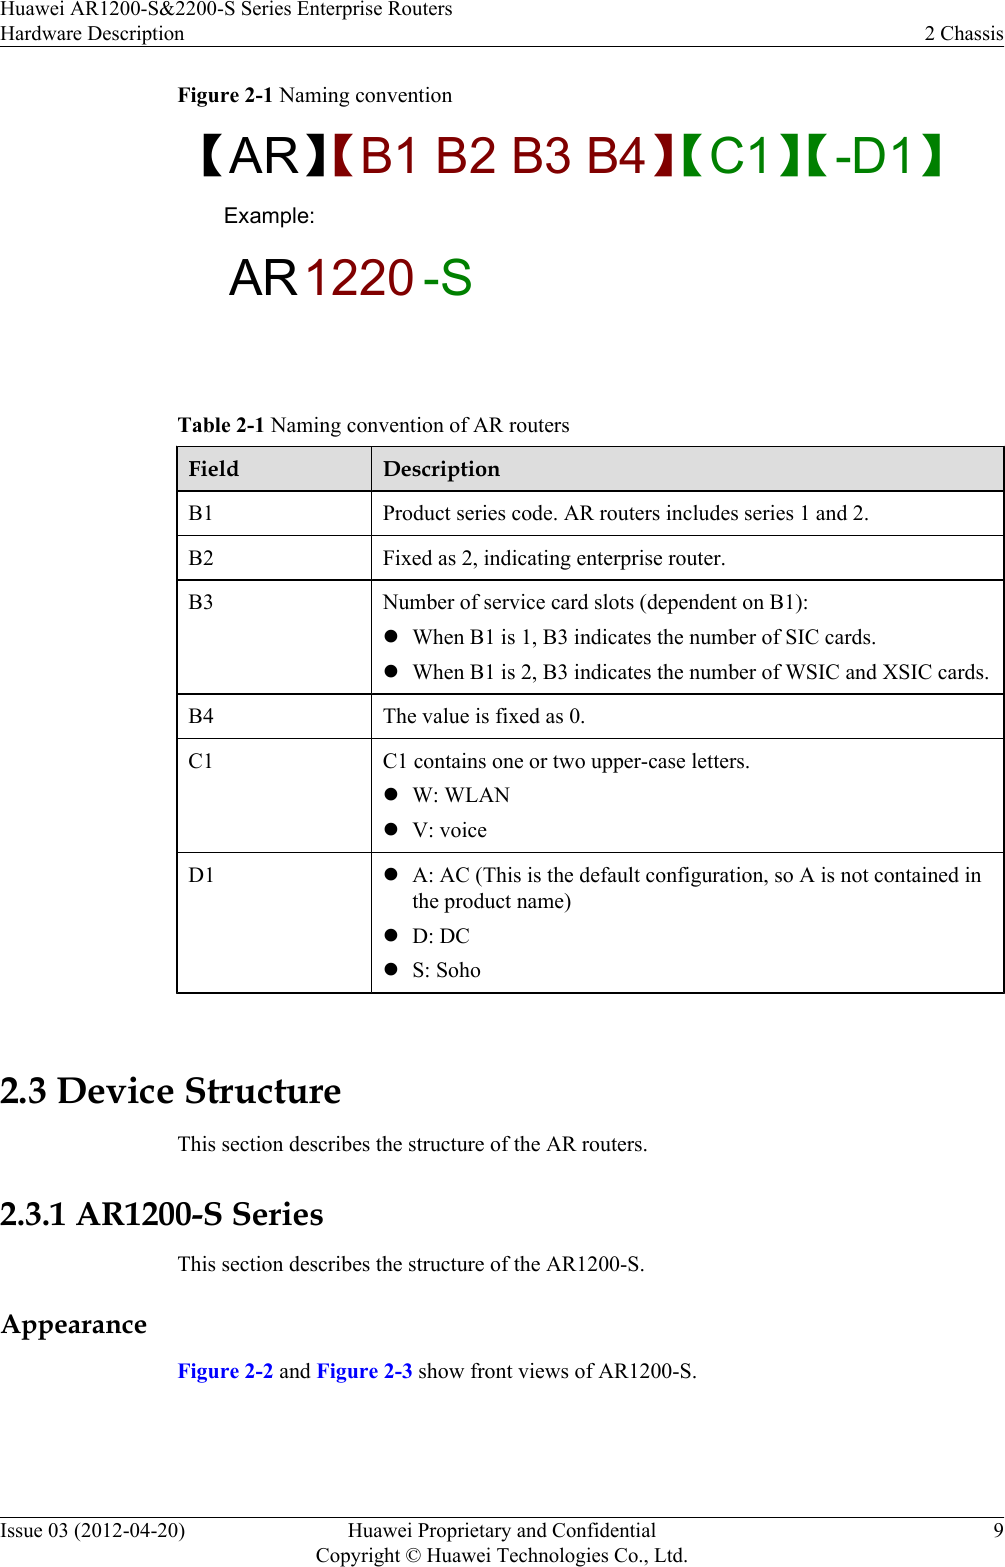 Figure 2-1 Naming convention【AR】【B1 B2 B3 B4】【C1】【-D1】Example:AR1220 -S Table 2-1 Naming convention of AR routersField DescriptionB1 Product series code. AR routers includes series 1 and 2.B2 Fixed as 2, indicating enterprise router.B3 Number of service card slots (dependent on B1):lWhen B1 is 1, B3 indicates the number of SIC cards.lWhen B1 is 2, B3 indicates the number of WSIC and XSIC cards.B4 The value is fixed as 0.C1 C1 contains one or two upper-case letters.lW: WLANlV: voiceD1 lA: AC (This is the default configuration, so A is not contained inthe product name)lD: DClS: Soho 2.3 Device StructureThis section describes the structure of the AR routers.2.3.1 AR1200-S SeriesThis section describes the structure of the AR1200-S.AppearanceFigure 2-2 and Figure 2-3 show front views of AR1200-S.Huawei AR1200-S&amp;2200-S Series Enterprise RoutersHardware Description 2 ChassisIssue 03 (2012-04-20) Huawei Proprietary and ConfidentialCopyright © Huawei Technologies Co., Ltd.9